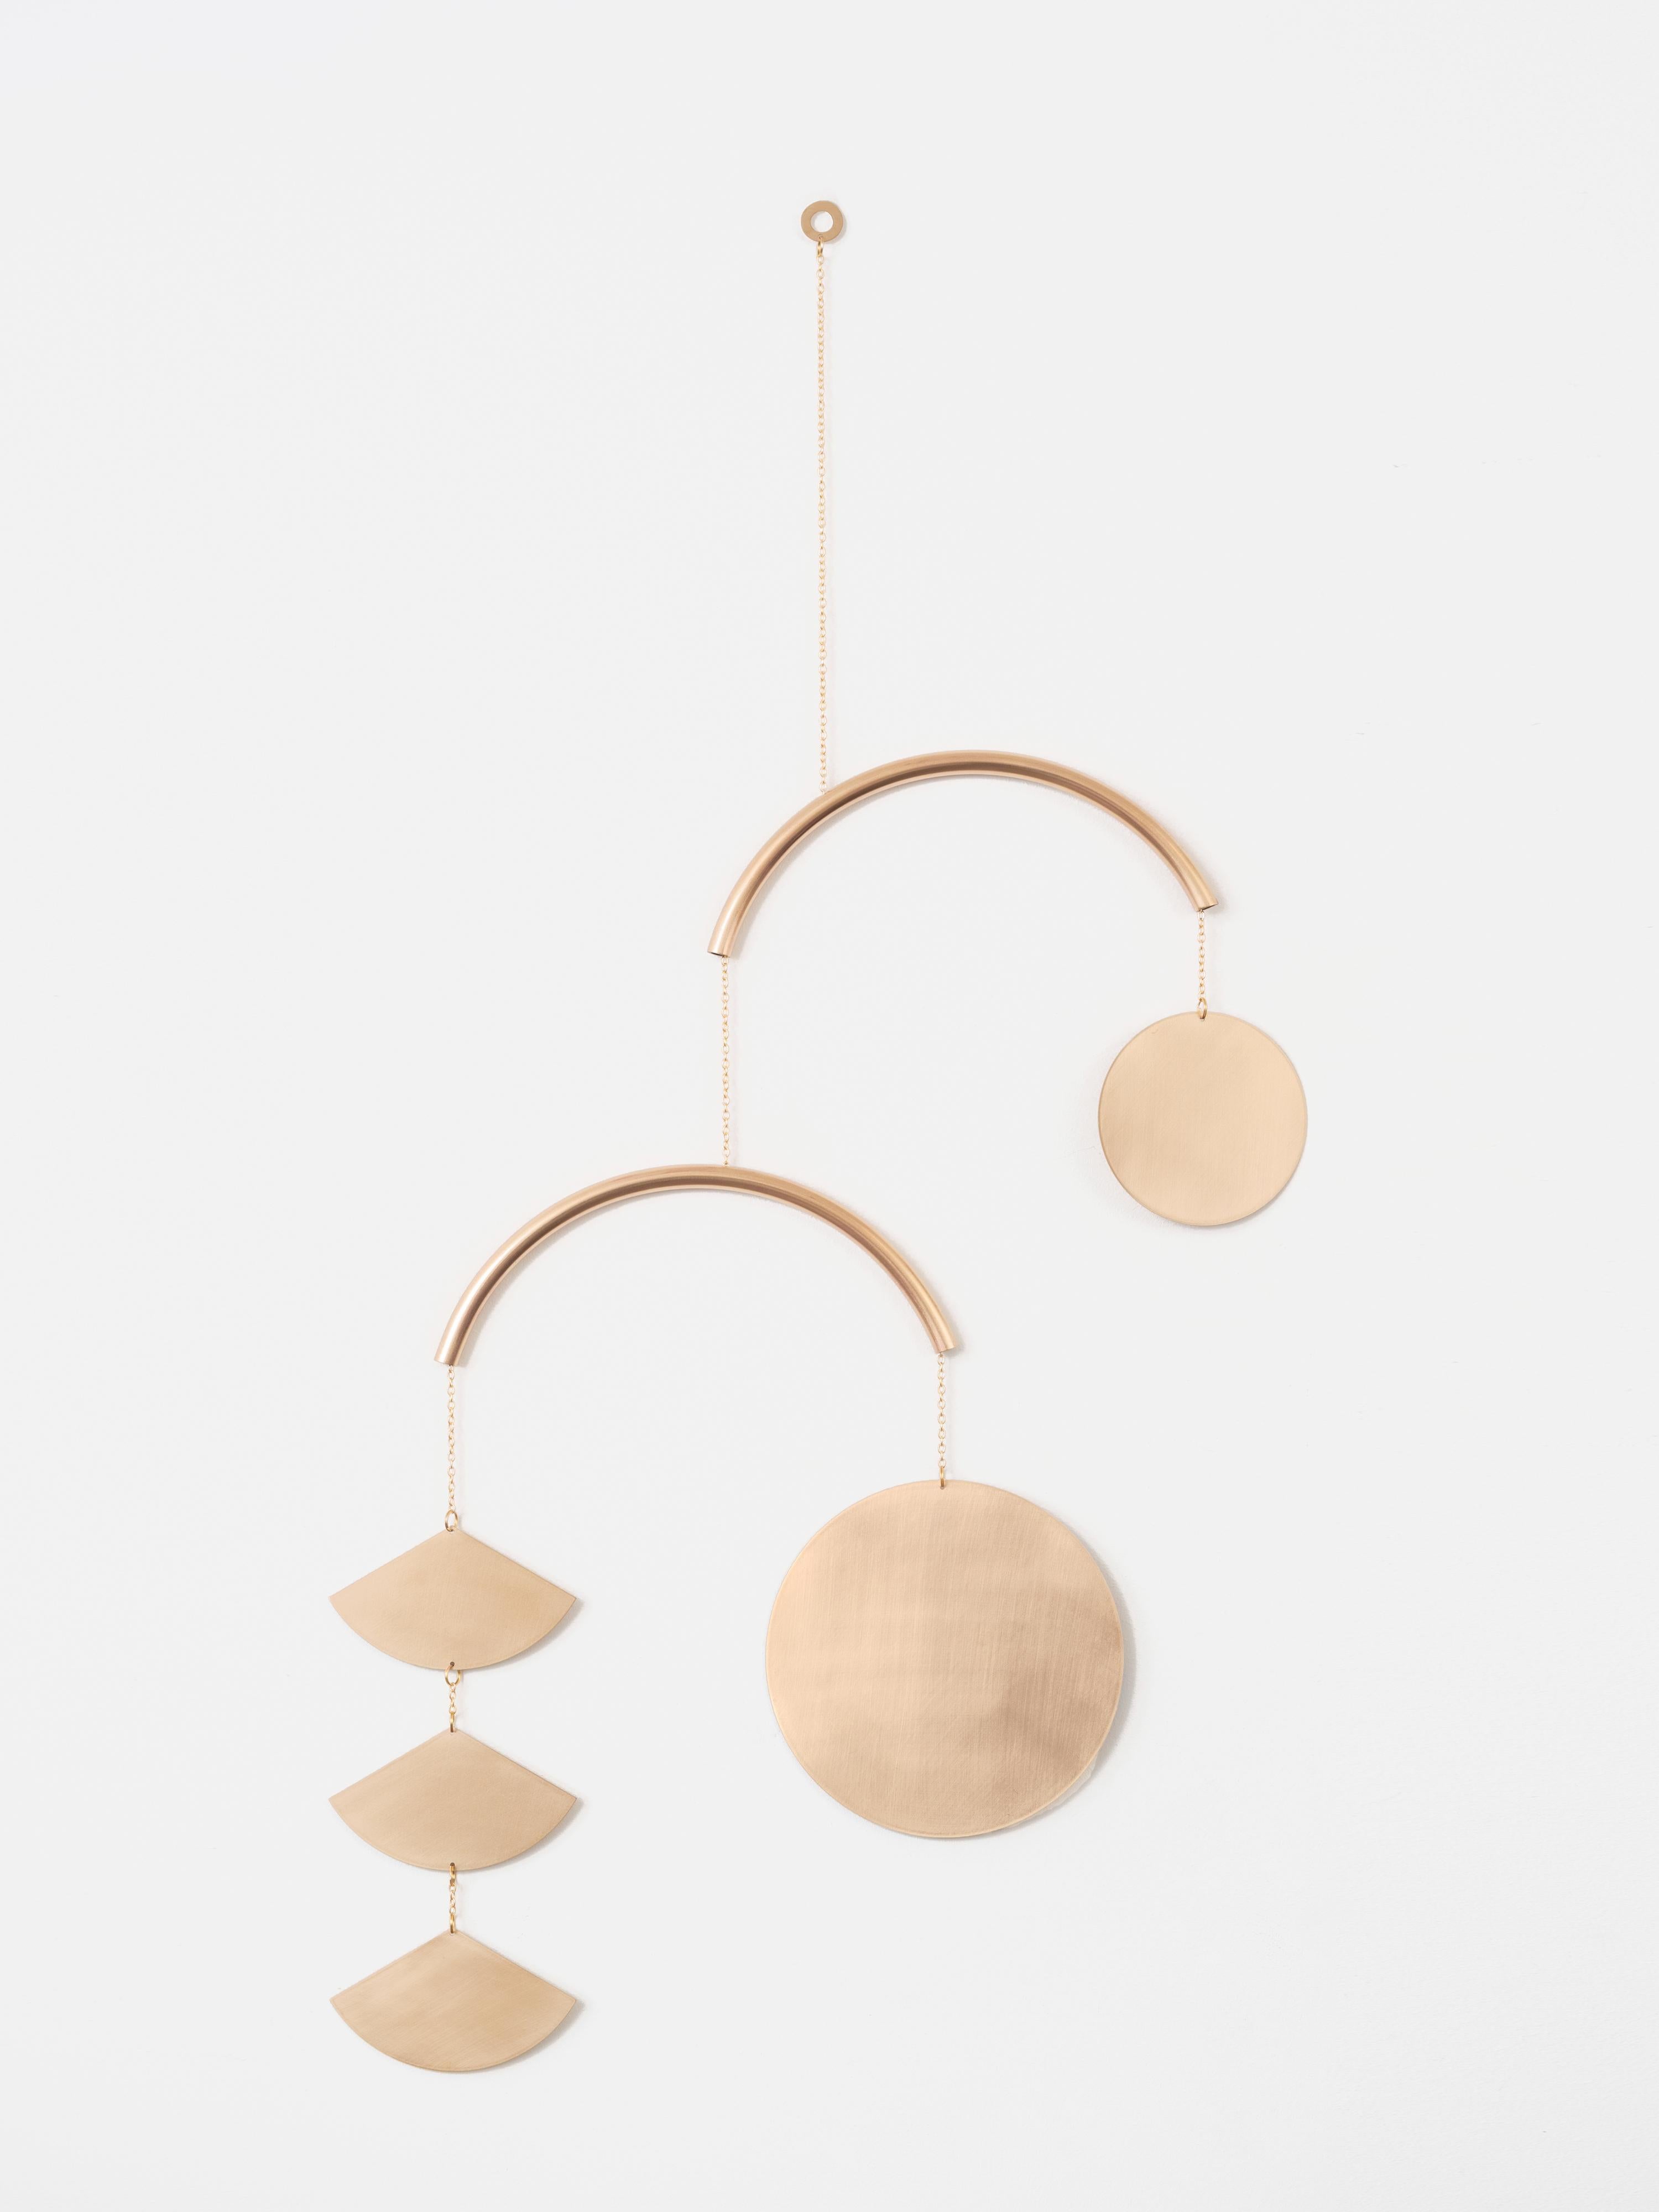 The Radiant Mobile explores the division of a circle, gracefully balancing suspended shapes. The curved bar creates fluidity in this captivating piece while the blush tones of the polished bronze radiate warmth within this kinetic mobile.